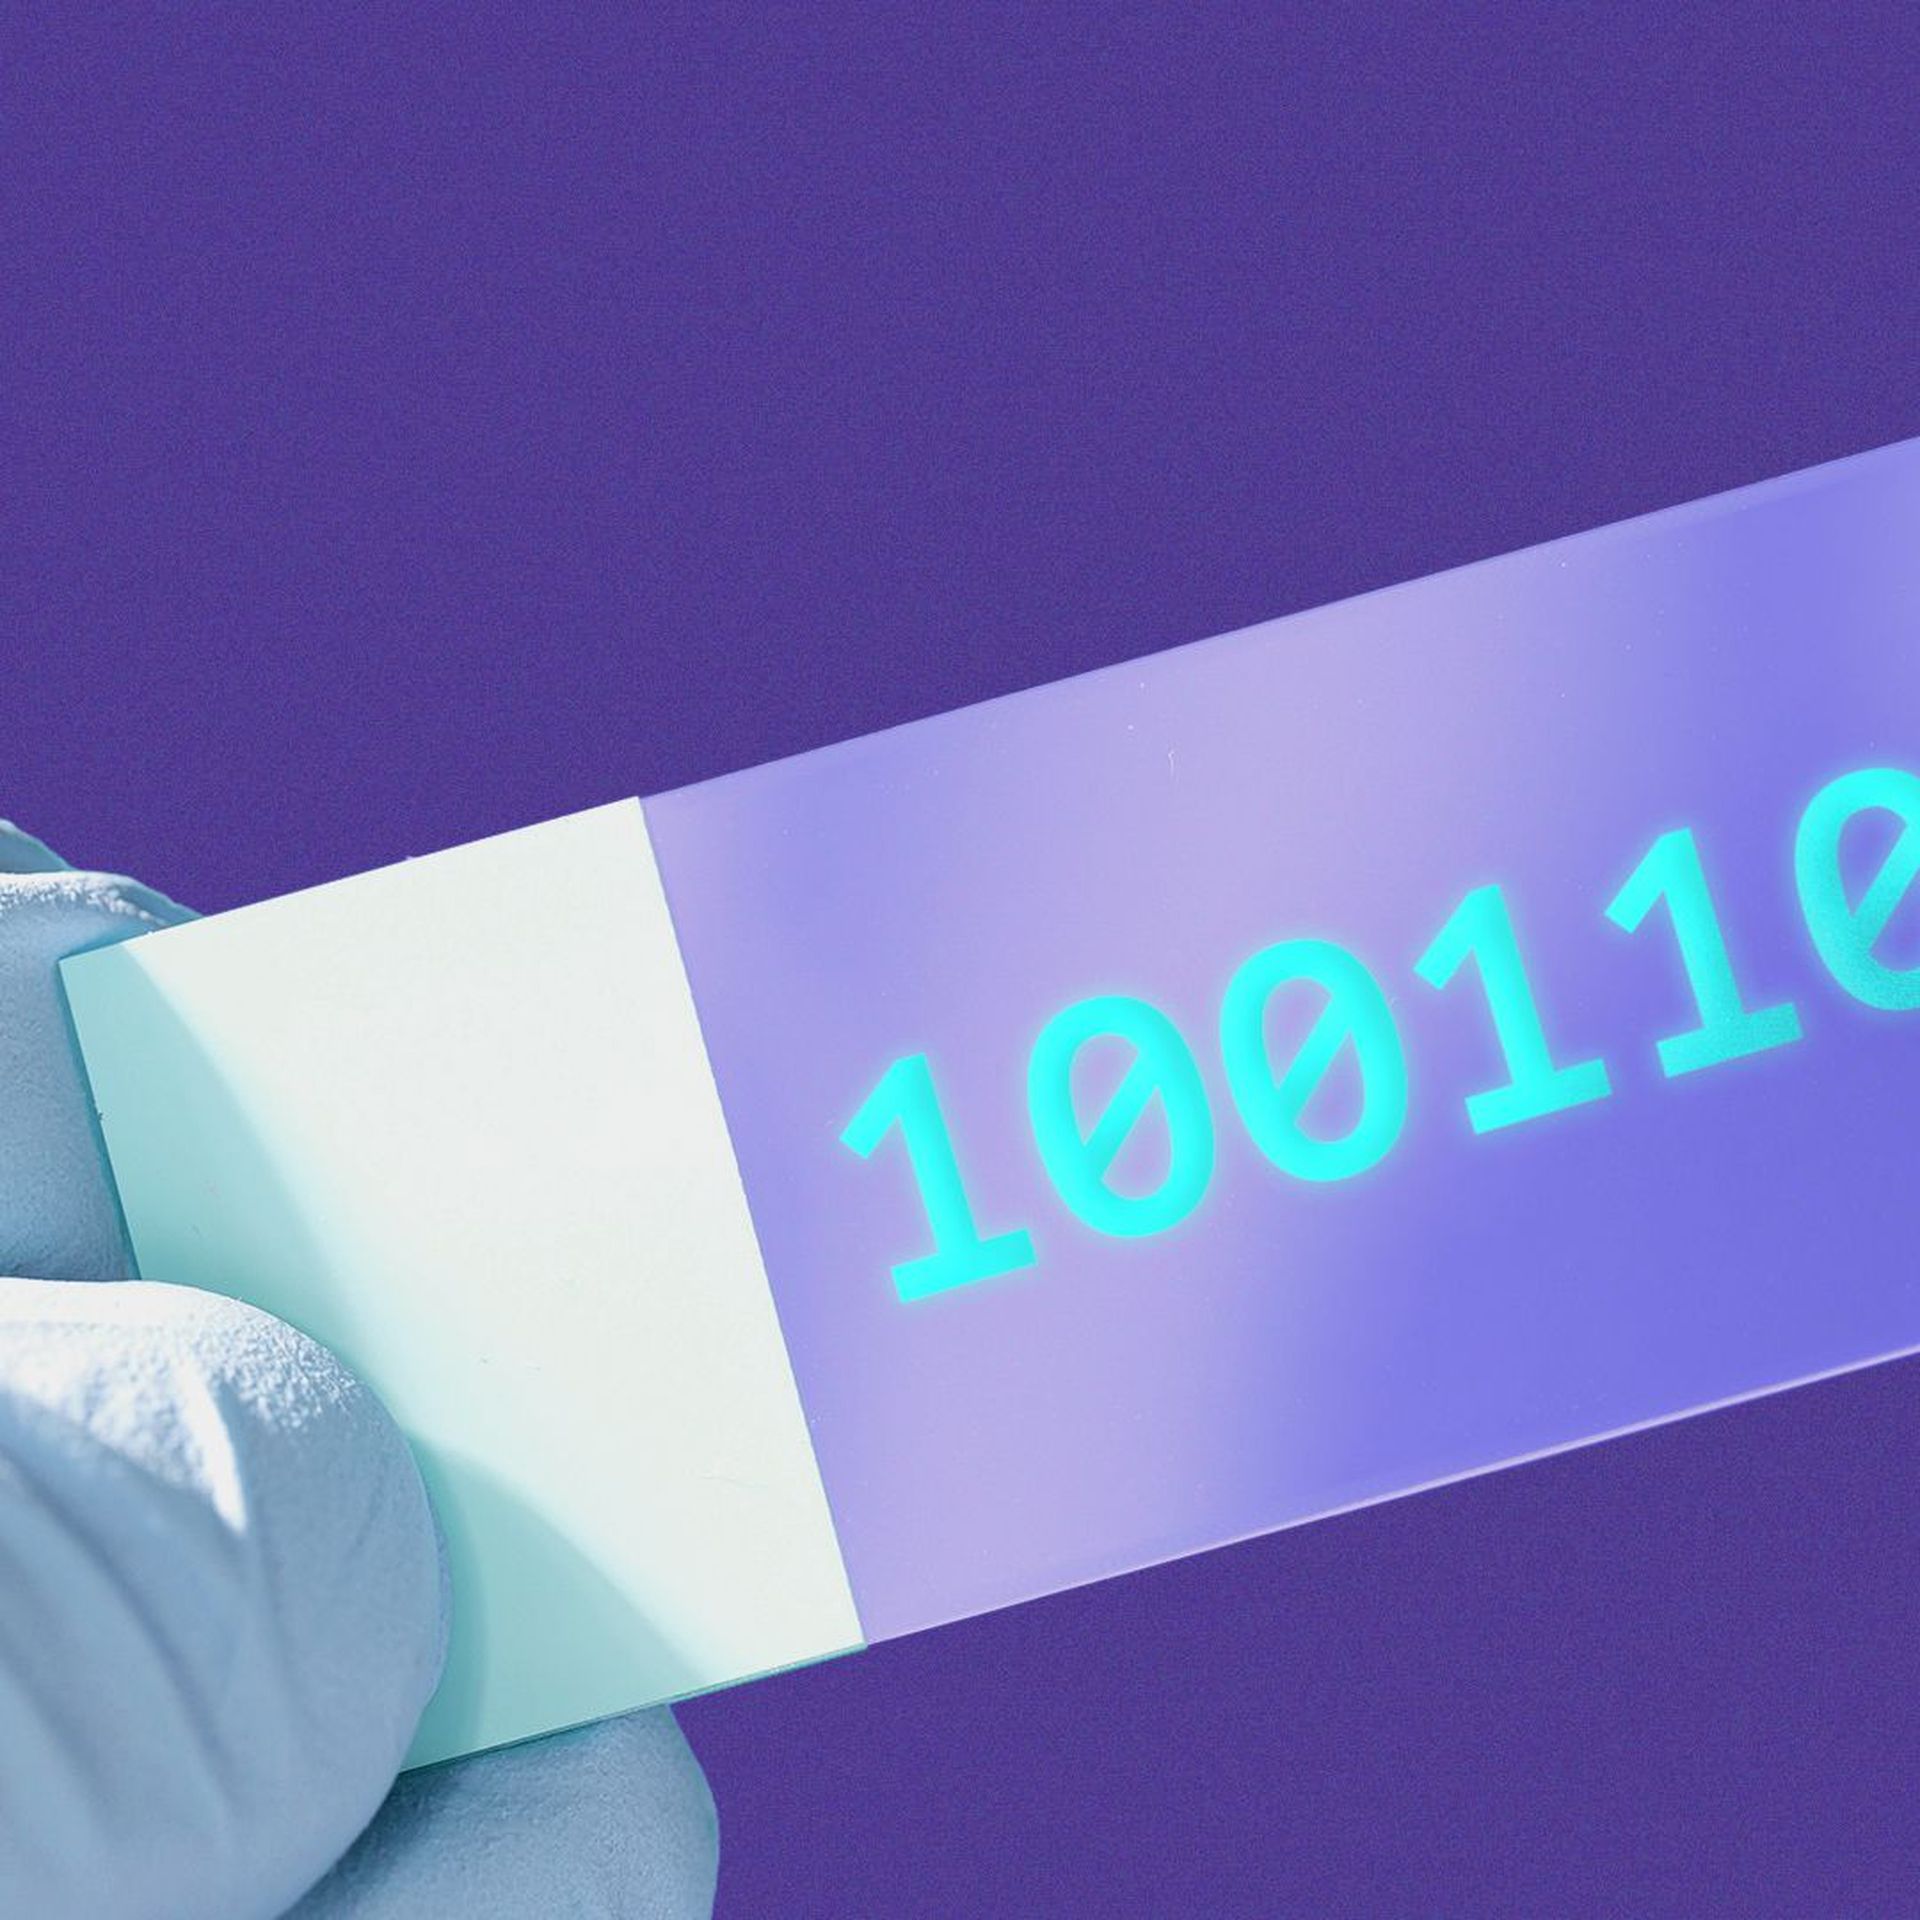 Illustration of a microscope slide with glowing binary code.